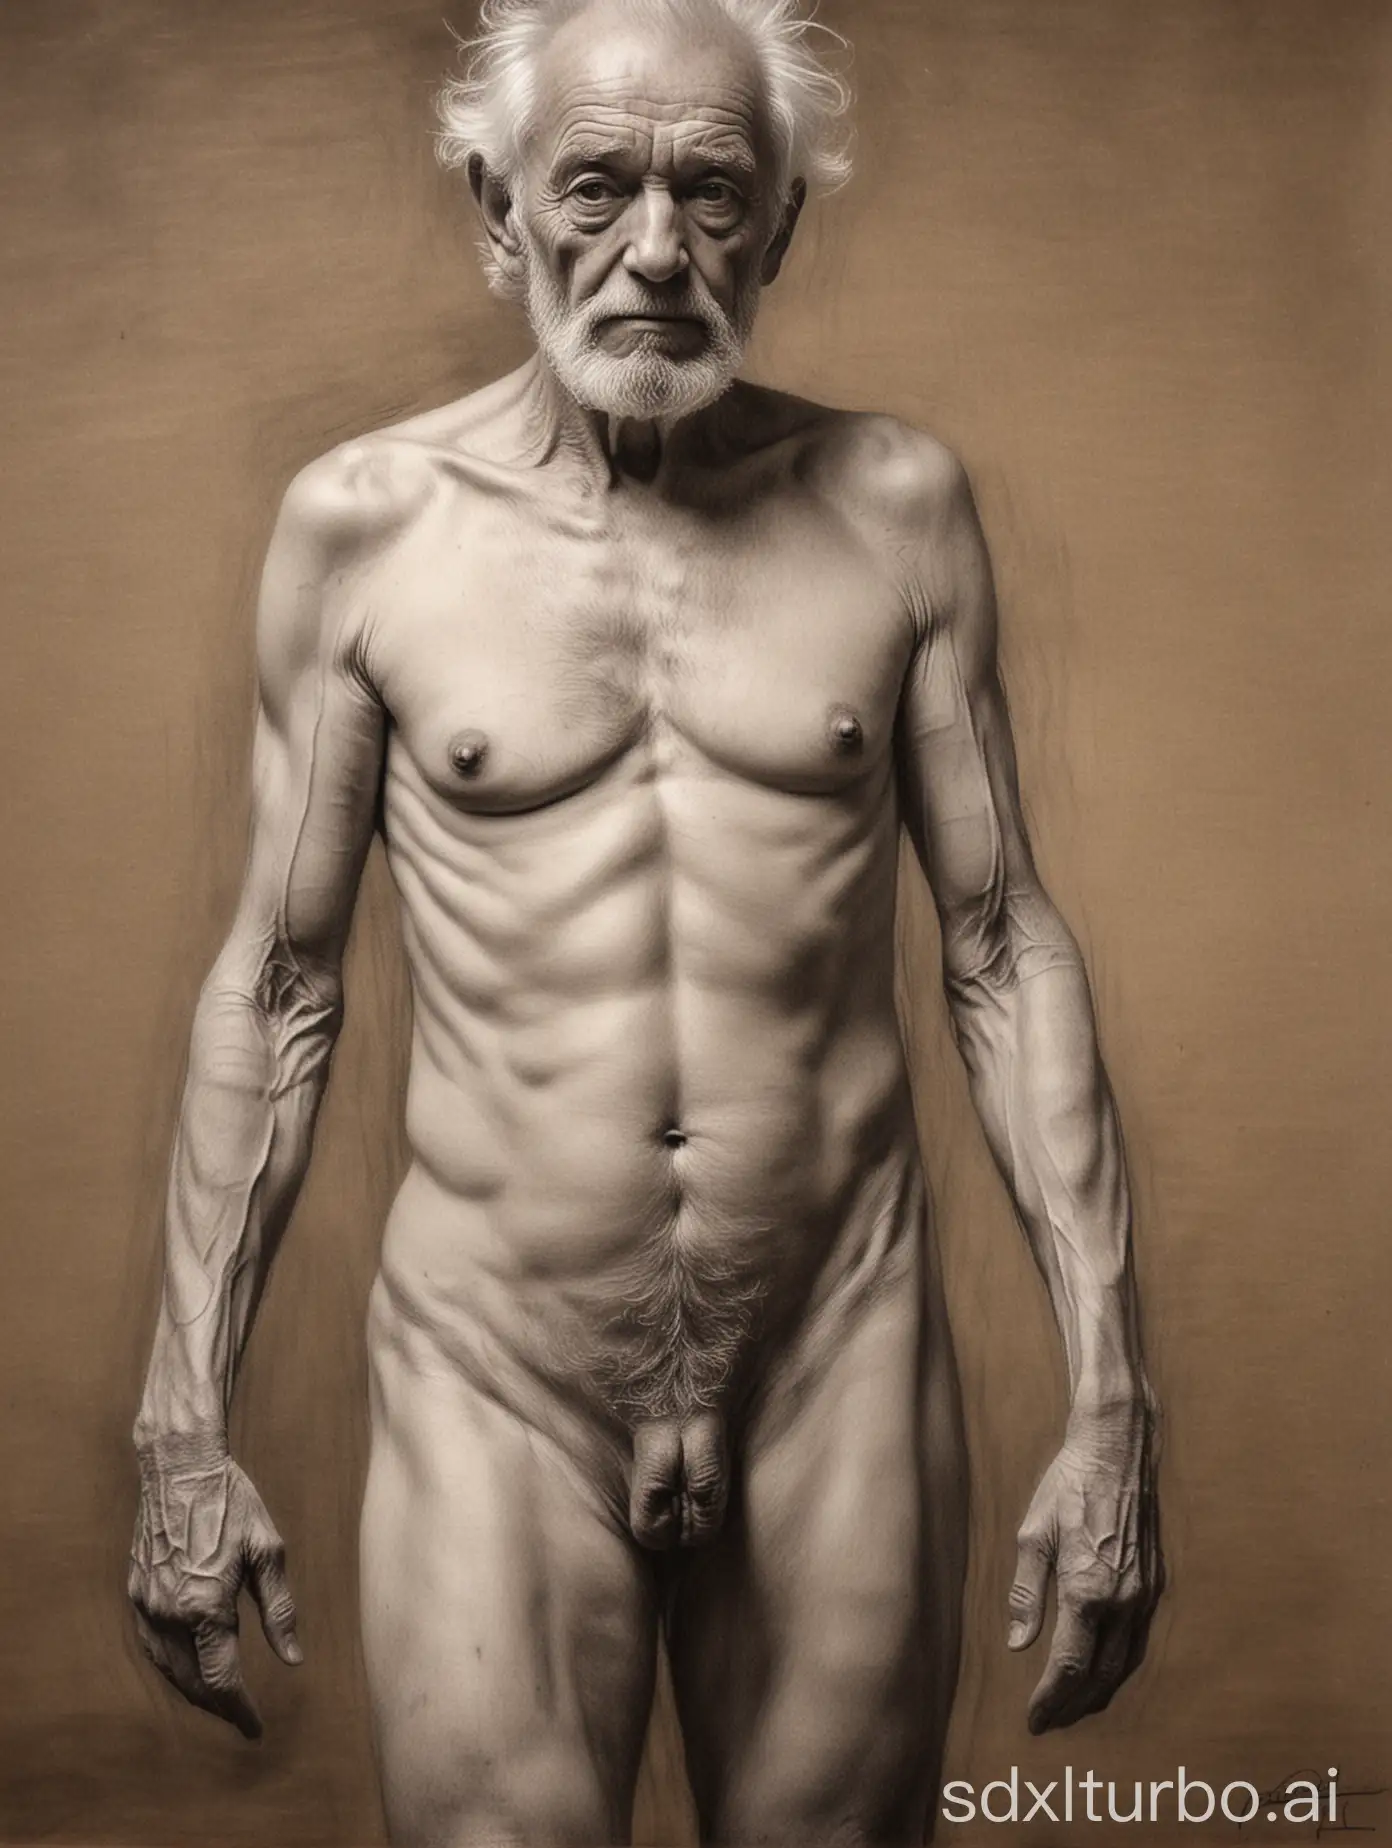 Charcoal drawing. Nude, seen from the front. old man,  pubic hair. Naked, in front of the viewer. Hands clasped behind his body.